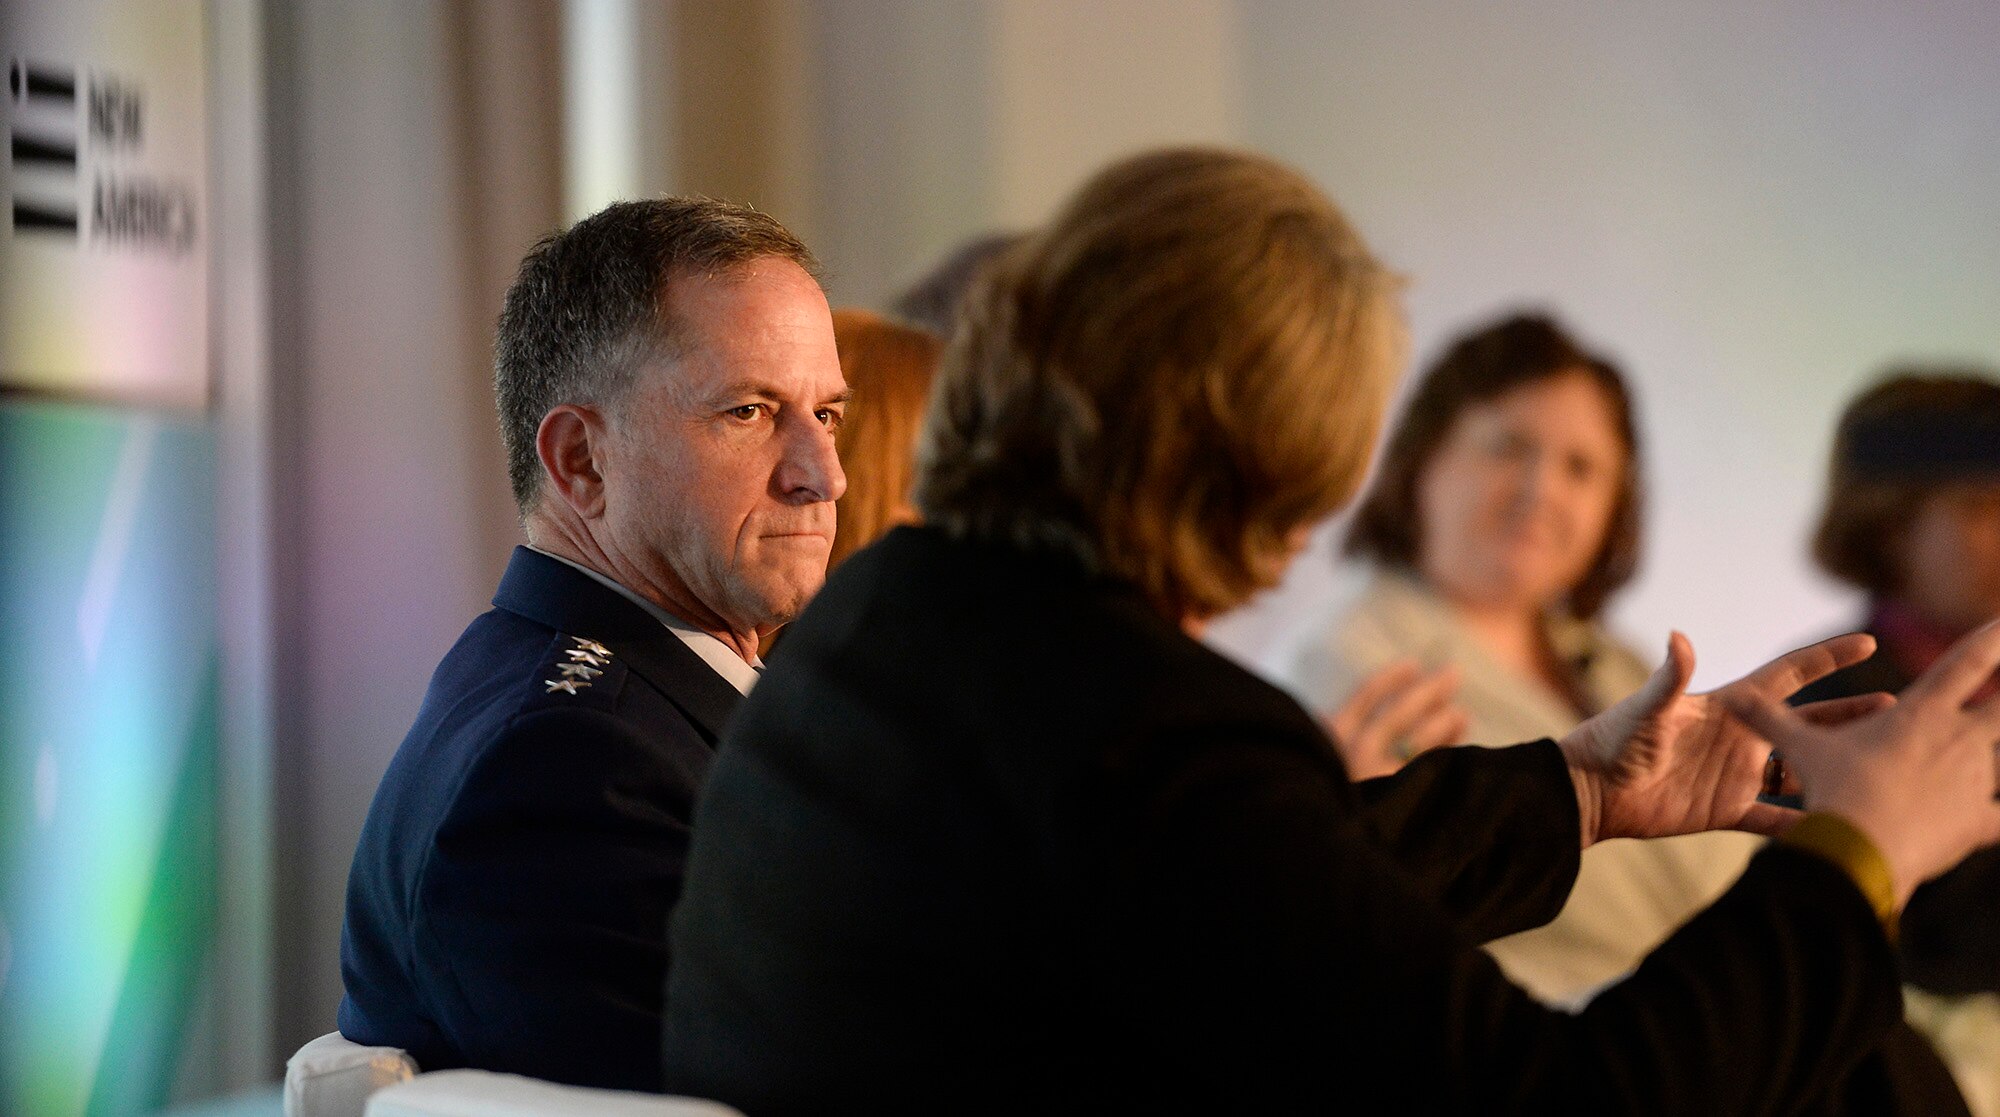 Air Force Vice Chief of Staff Gen. David L. Goldfein participates in a panel discussion during the second annual "Future of War" conference, hosted by the New American Foundation in Washington, D.C., March 10, 2016. (U.S. Air Force photo/Scott M. Ash) 